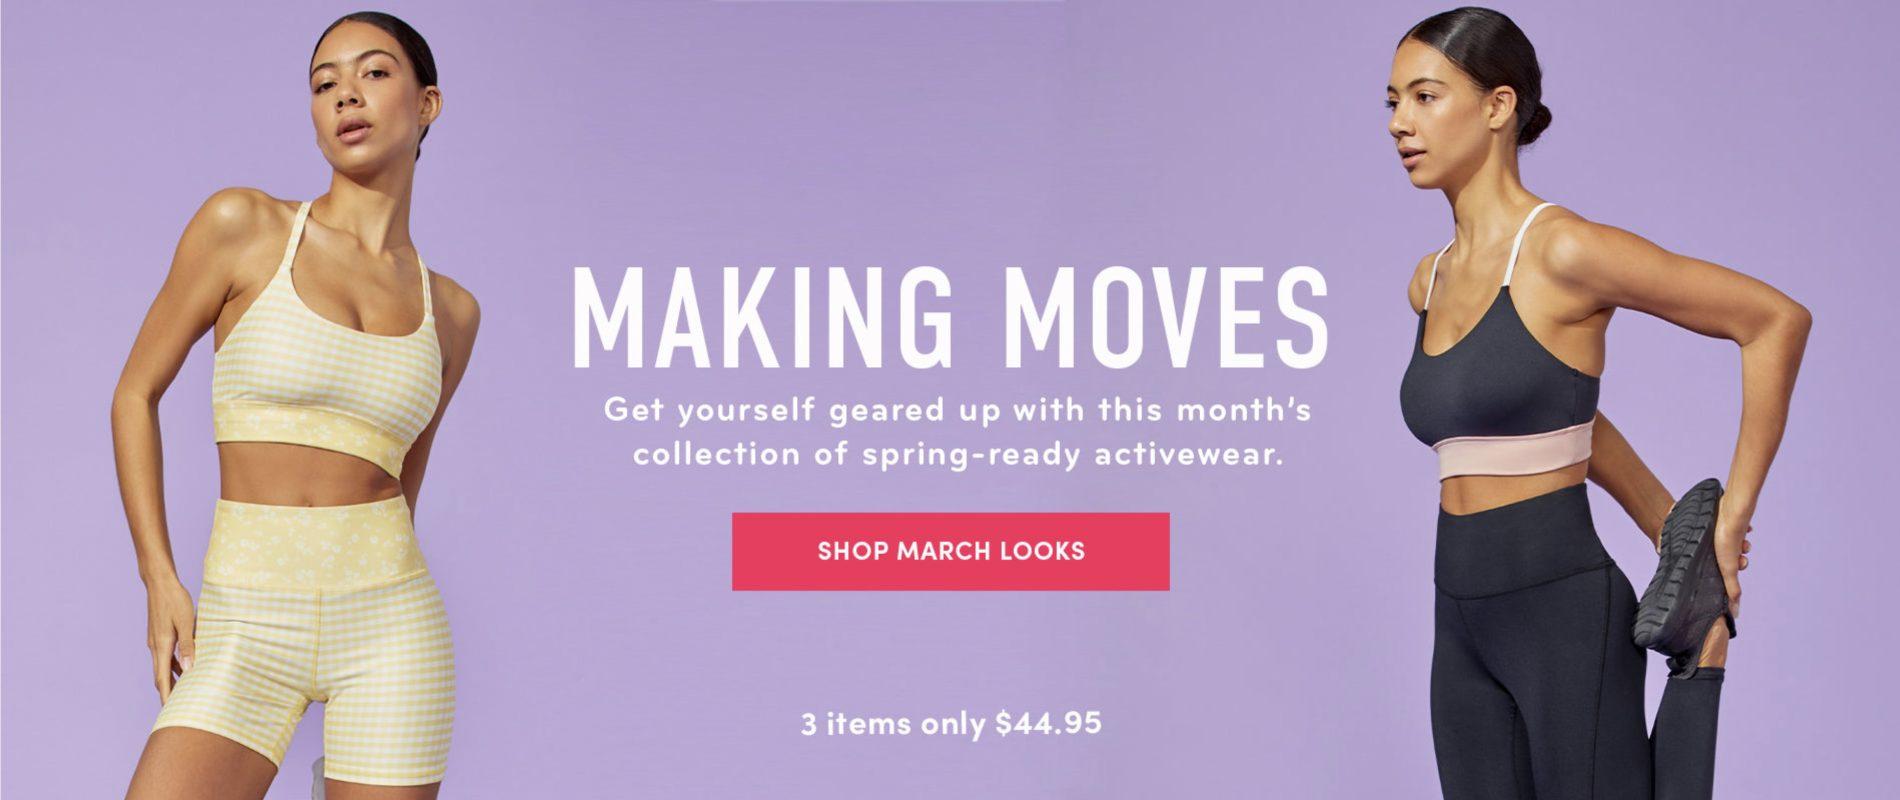 Ellie Women’s Fitness Subscription Box – March 2022 Reveal + Coupon Code!